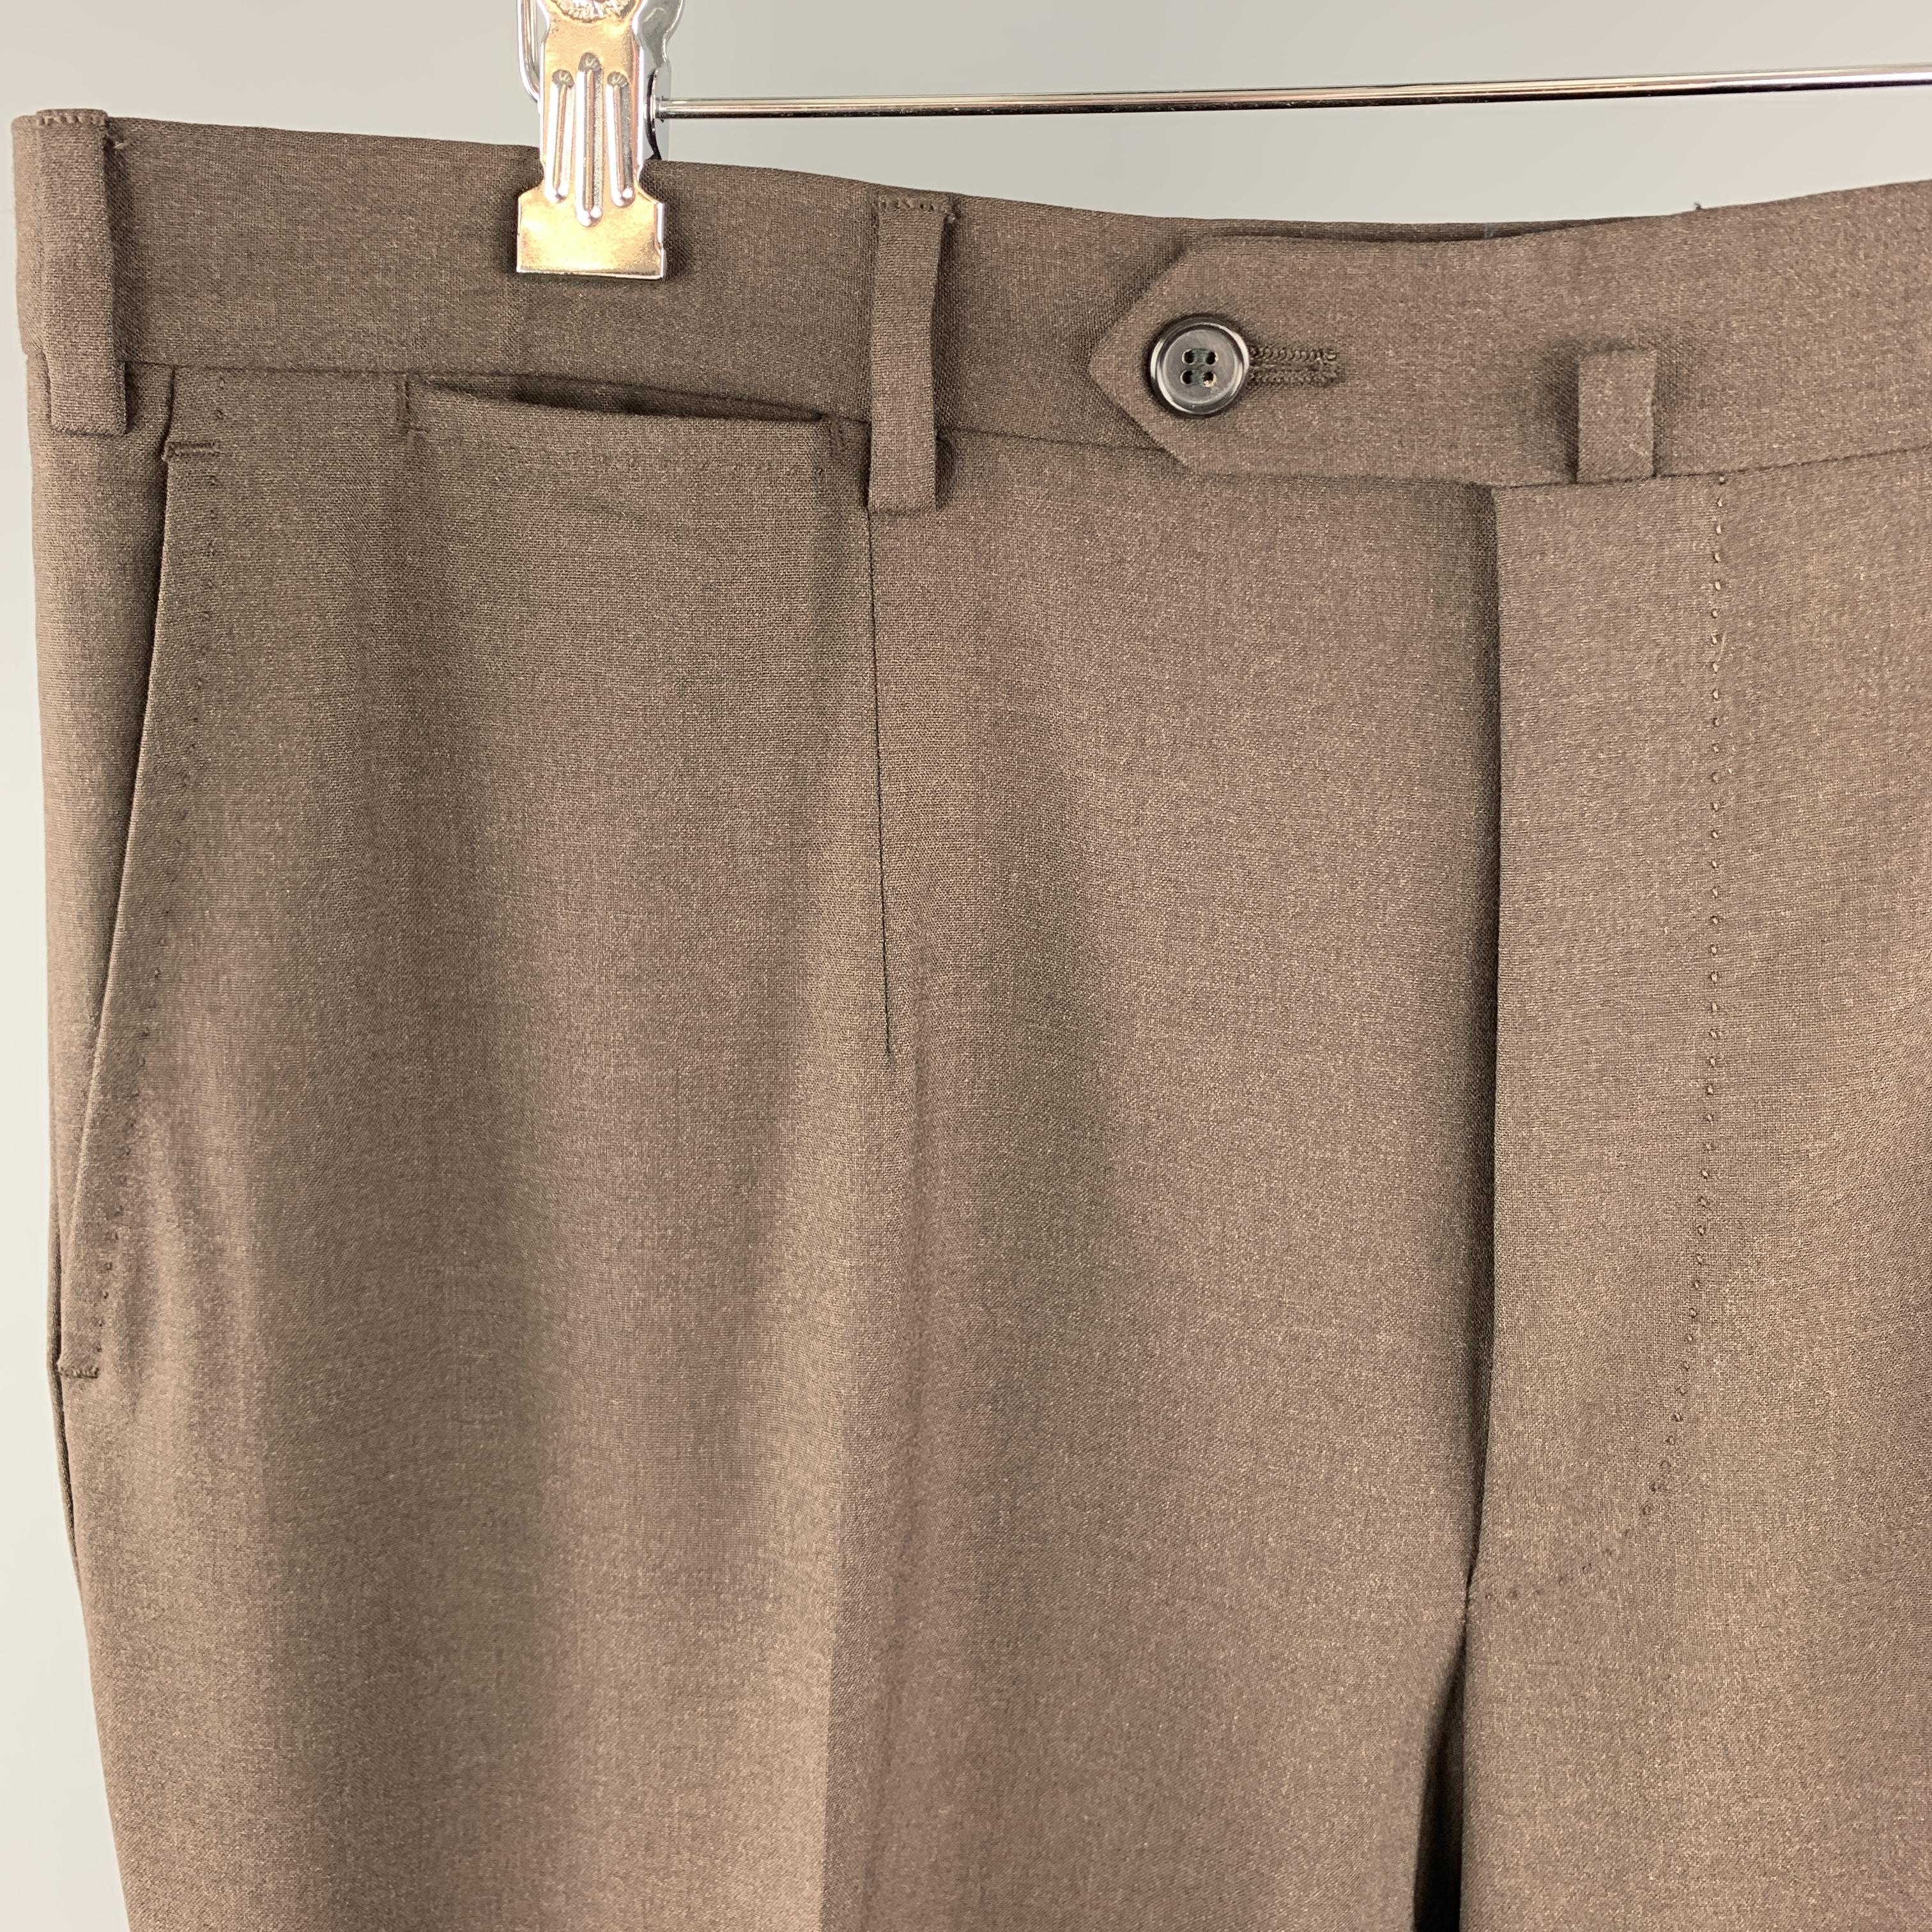 ISAIA dress pants come in brown wool with a tab waistband, zip fly and tab waistband. Made in Italy.

Excellent Pre-Owned Condition.
Marked: IT 54

Measurements:

Waist: 38 in.
Rise: 11 in.
Inseam: 33 in.